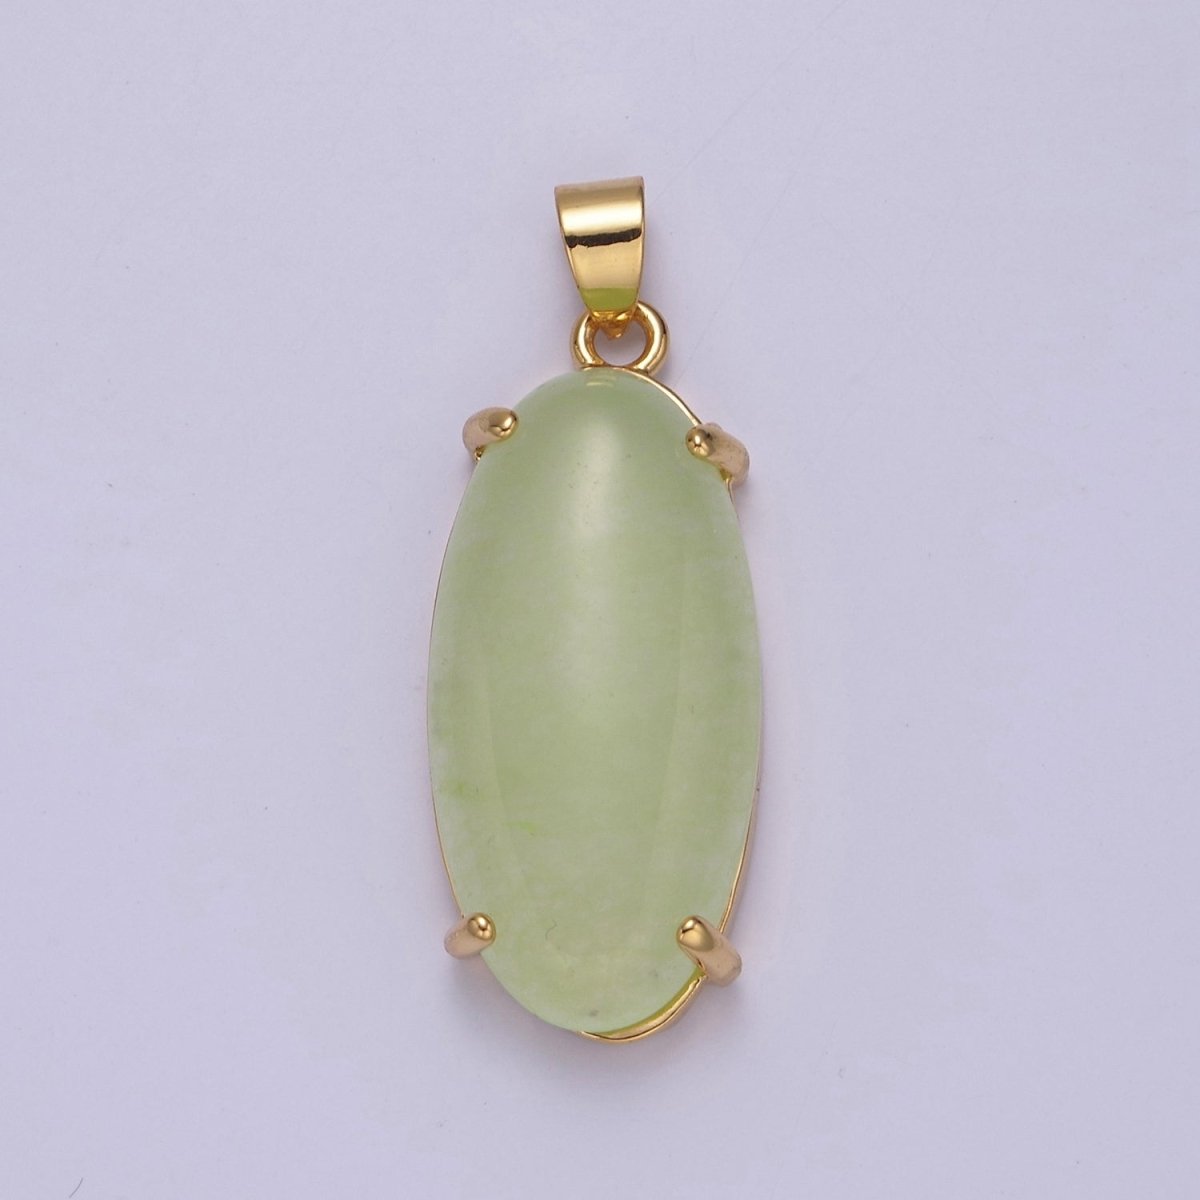 Big Light Green Oval Lucky jade pendant Drop Charm for Necklace W-645 W-646 - DLUXCA